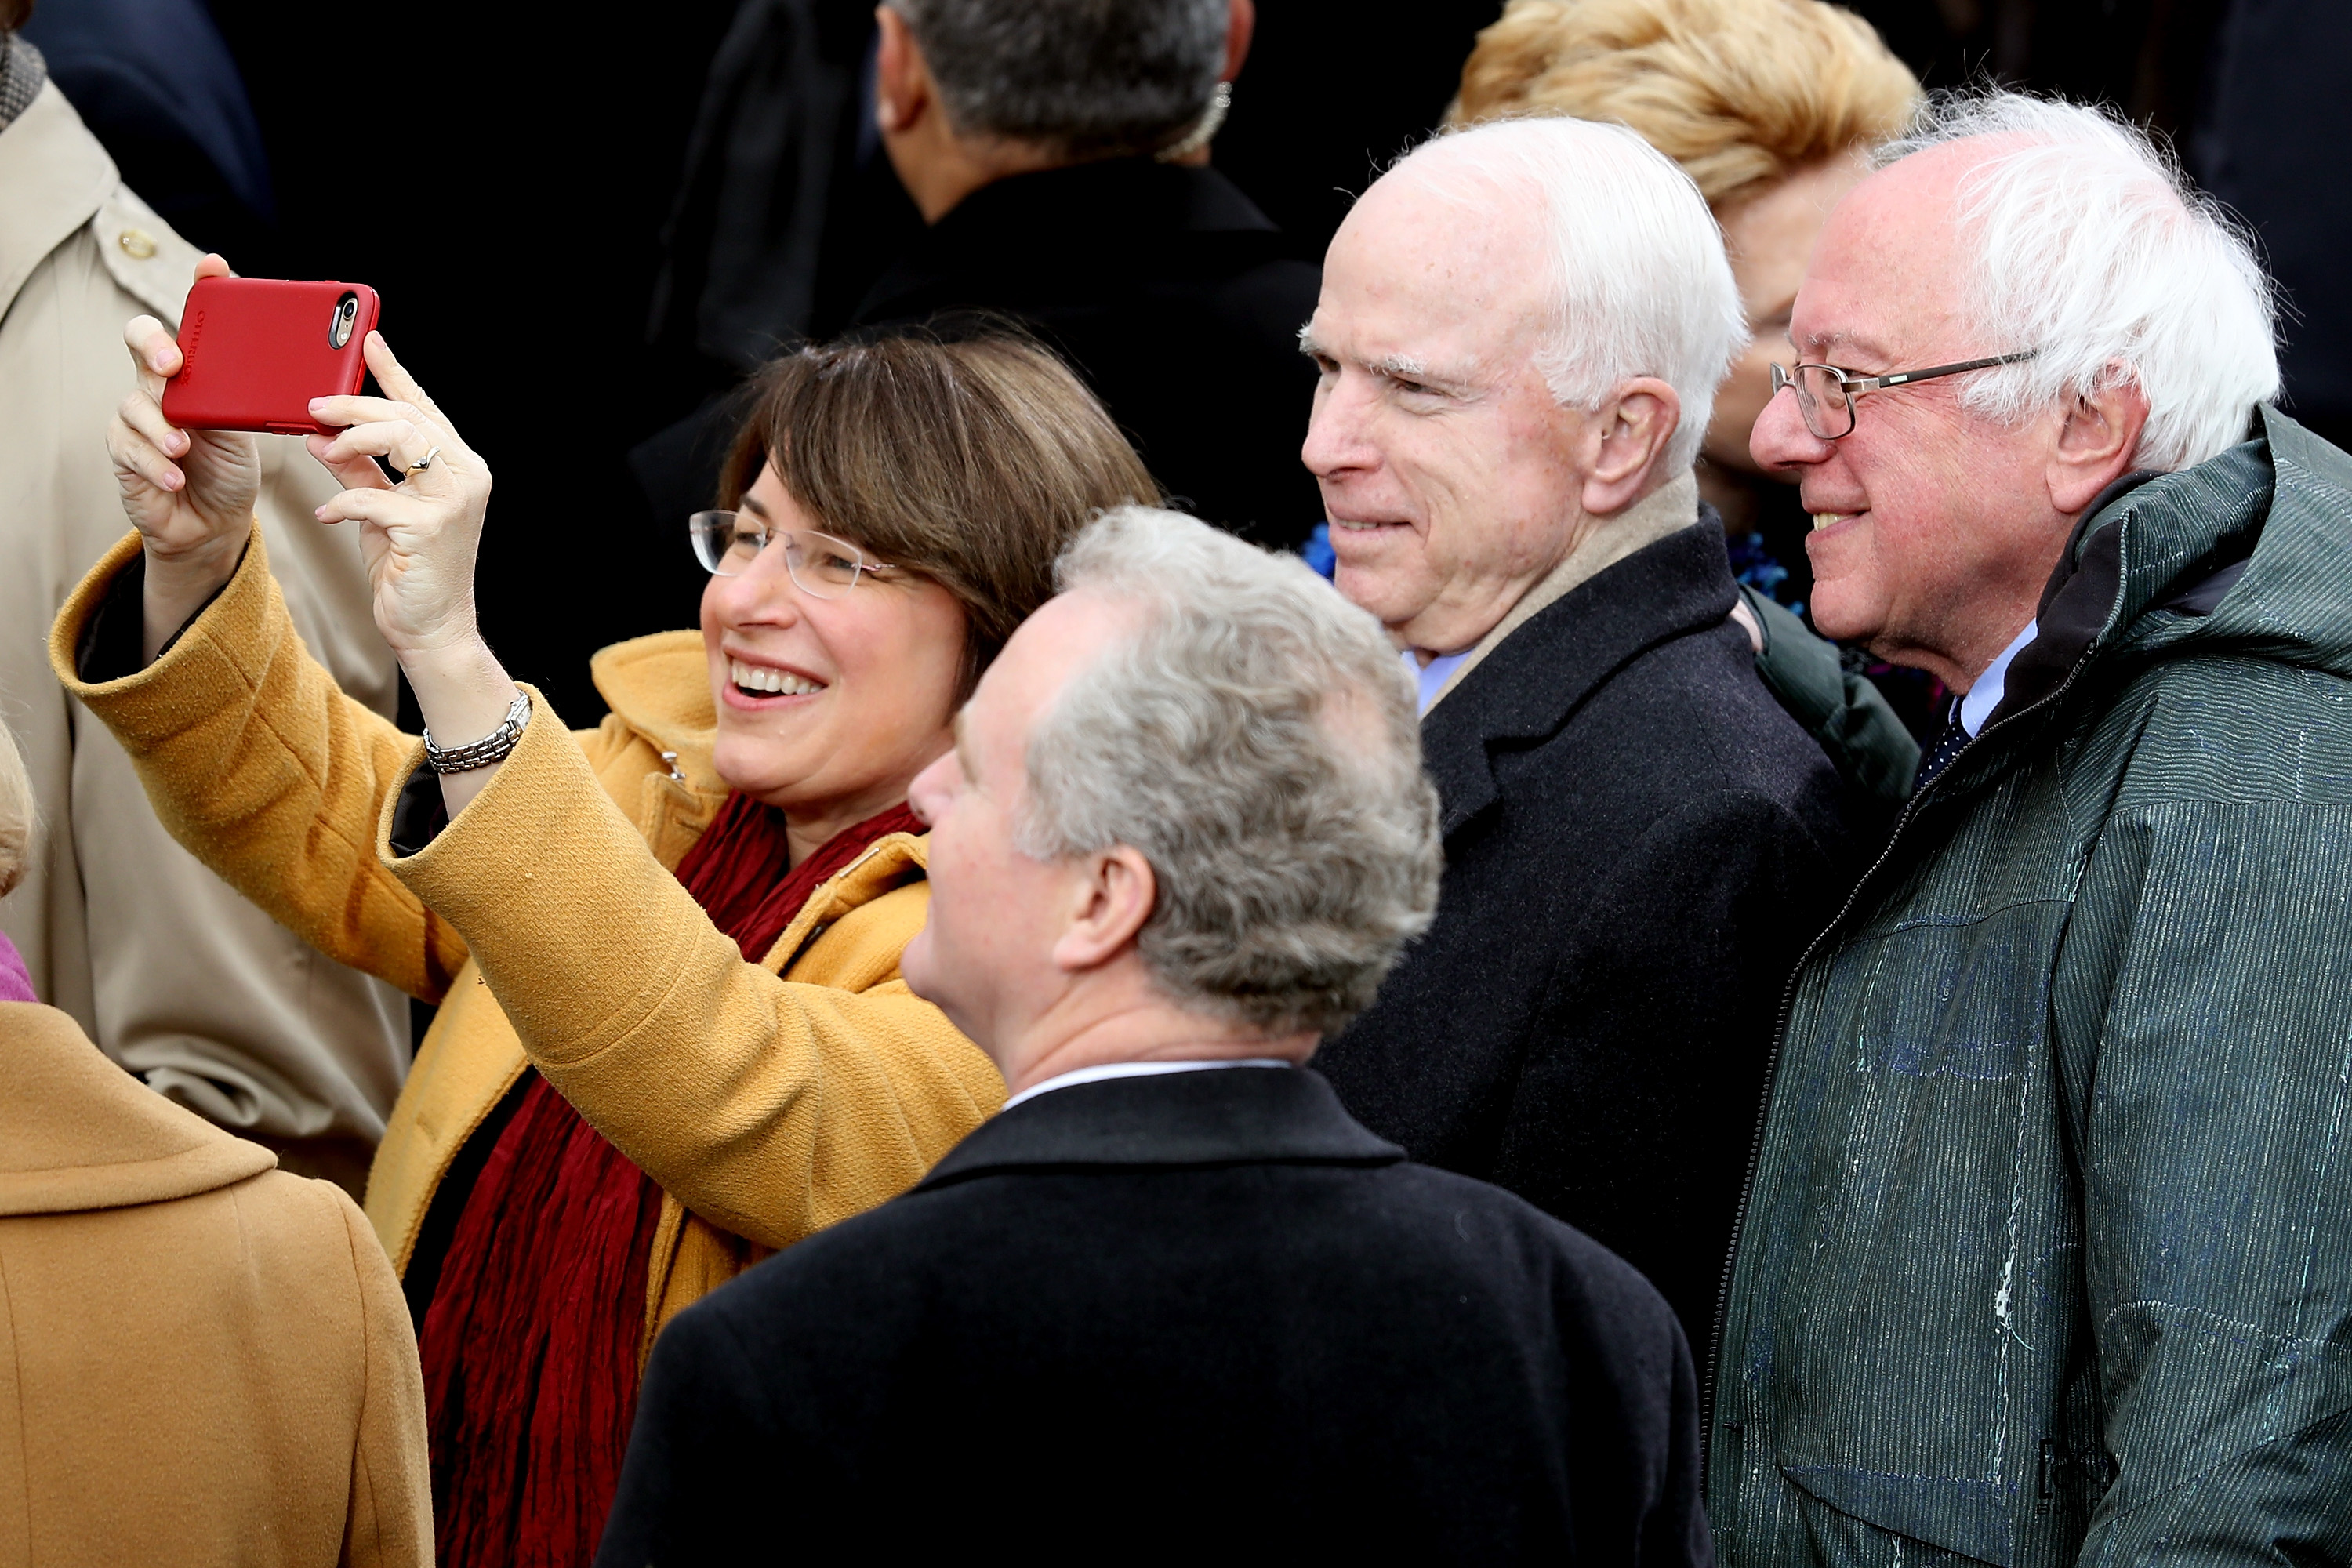 WASHINGTON, DC - JANUARY 20: Sen. Amy Klobuchar (D-MN) (L) takes a selfie with Sen. John McCain (R-AZ) and Sen. Bernie Sanders (D-VT) (R) on the West Front of the U.S. Capitol on January 20, 2017 in Washington, DC. In today's inauguration ceremony Donald J. Trump becomes the 45th president of the United States. (Photo by Joe Raedle/Getty Images)